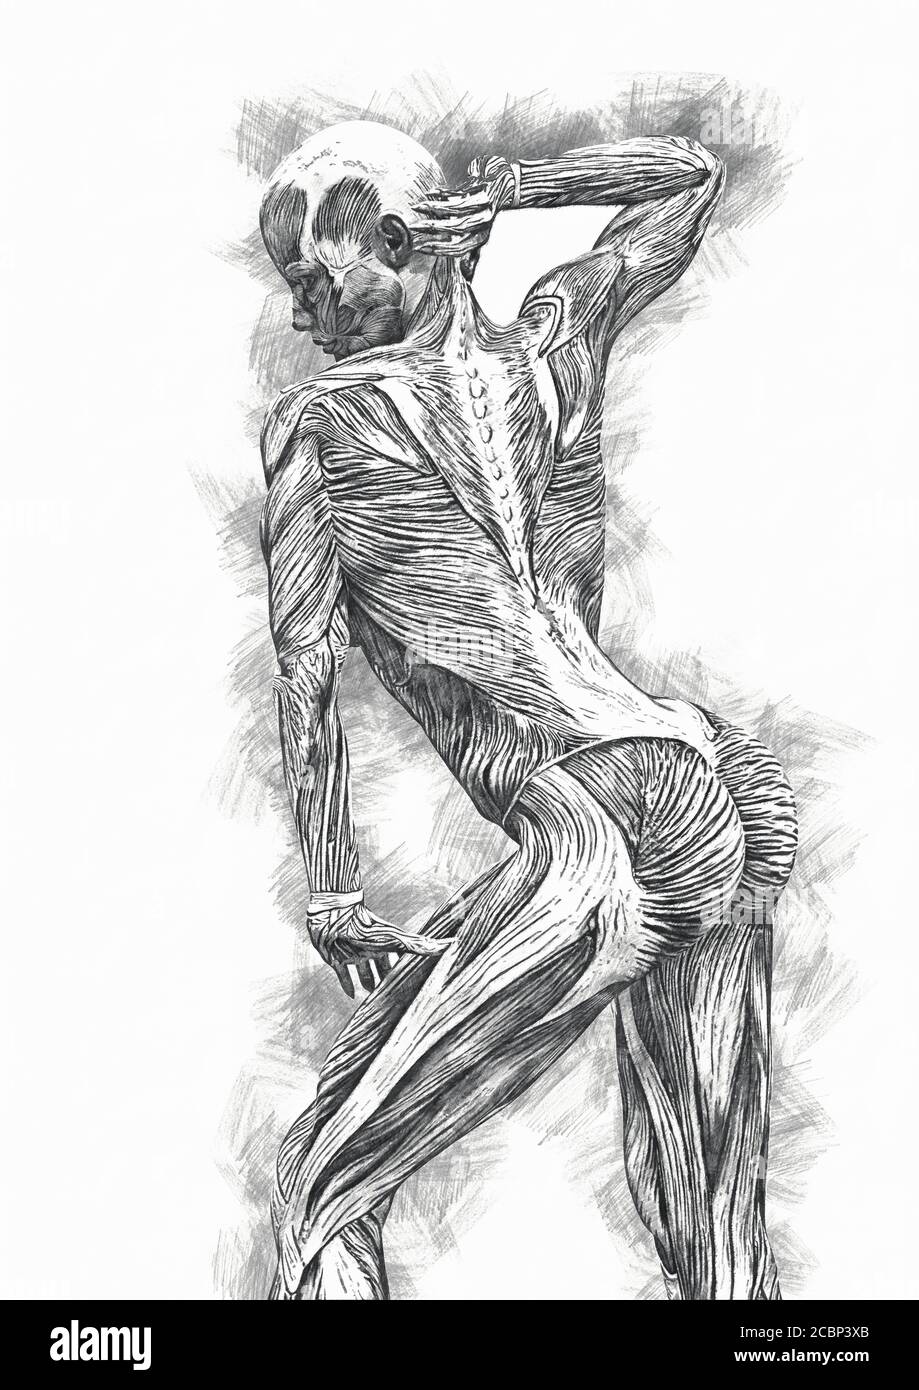 muscle woman doing a gymnastic pose in sketcher style close up, 3d illustration Stock Photo